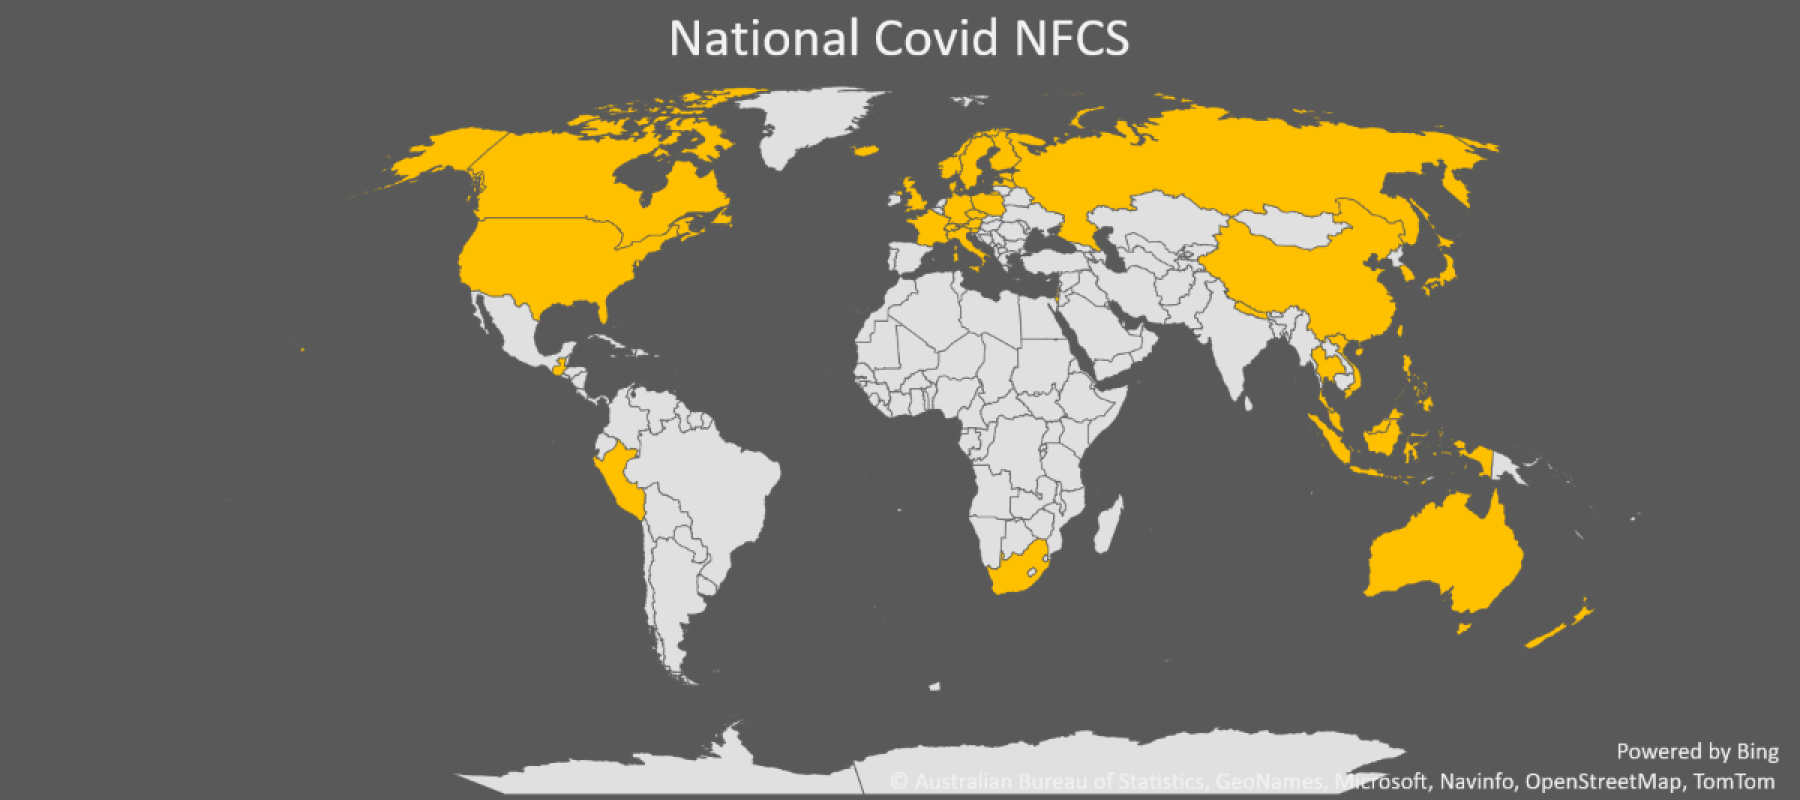 World map showing countries with a National Covid Vaccine no-fault compensation scheme